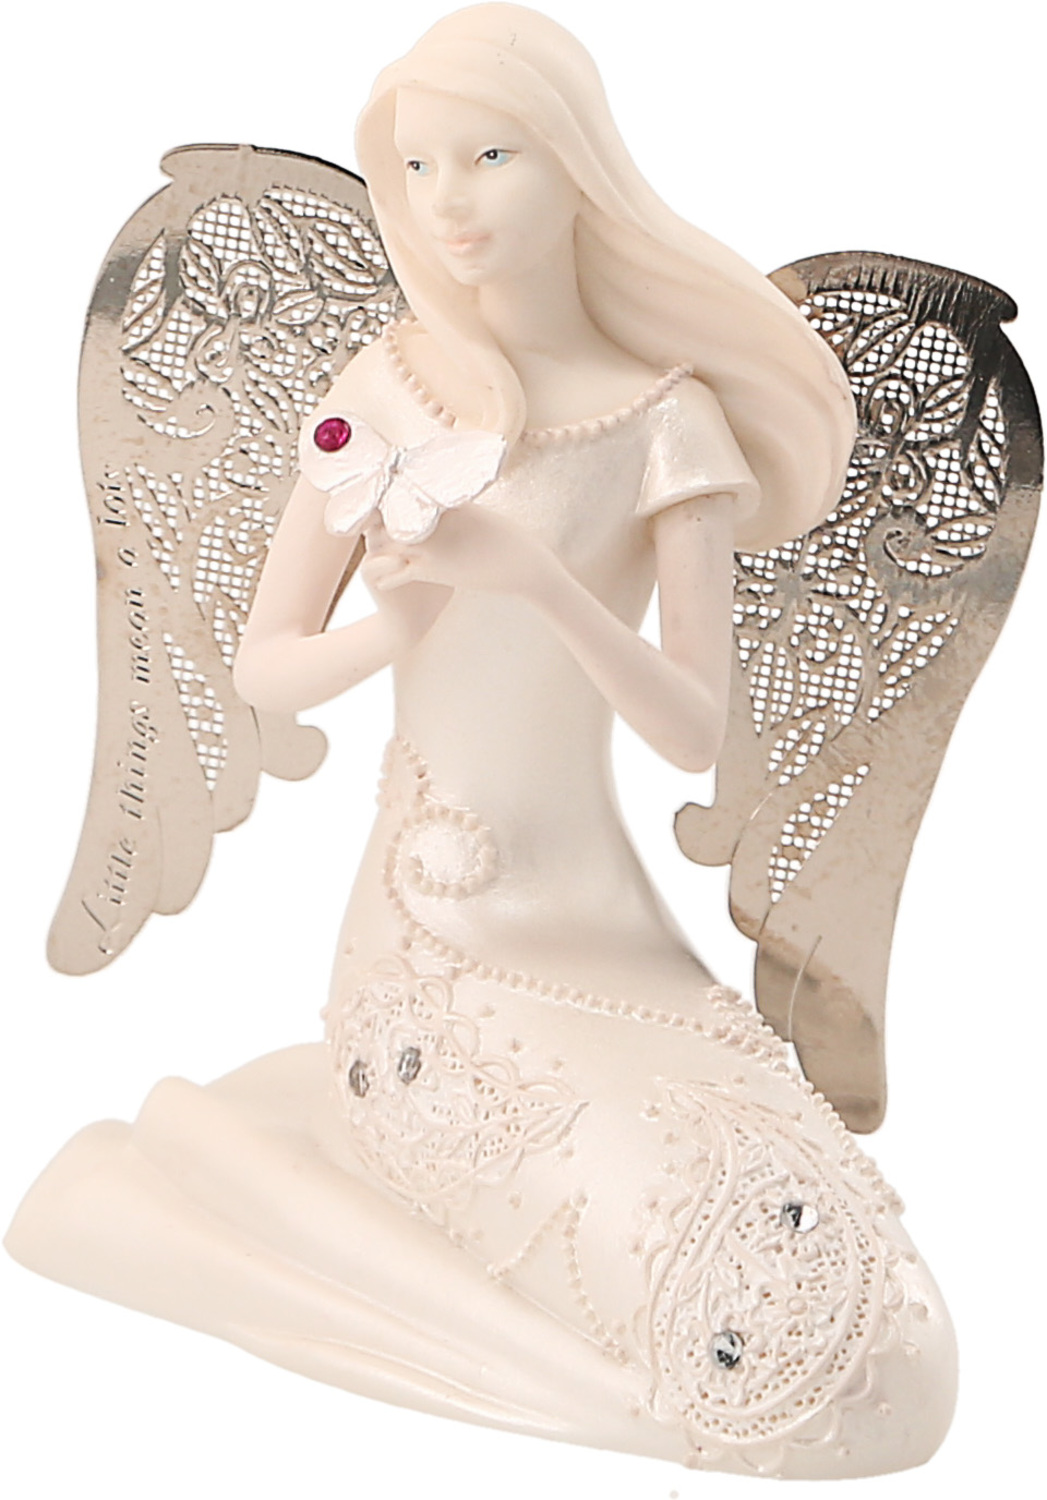 October Birthstone Angel by Little Things Mean A Lot - October Birthstone Angel - 3.5" October Angel with Tourmaline Butterfly